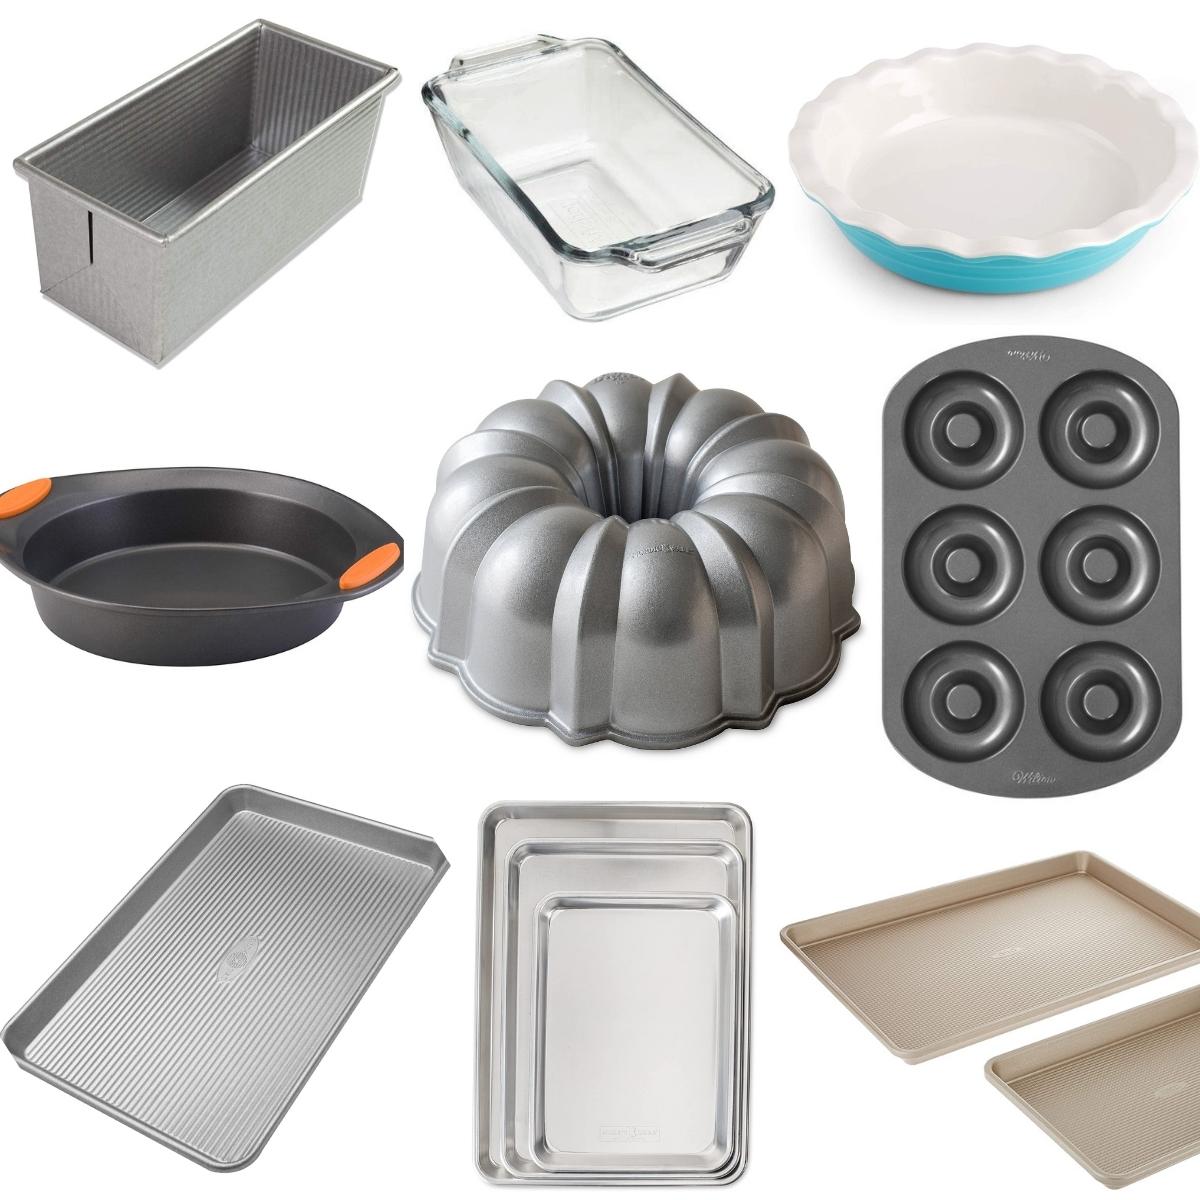 Kitchen Bakeware Lot With Pyrex Glass Baking Pans, Muffin Pans, Nordic Ware  The Bundt Pan - See Photos